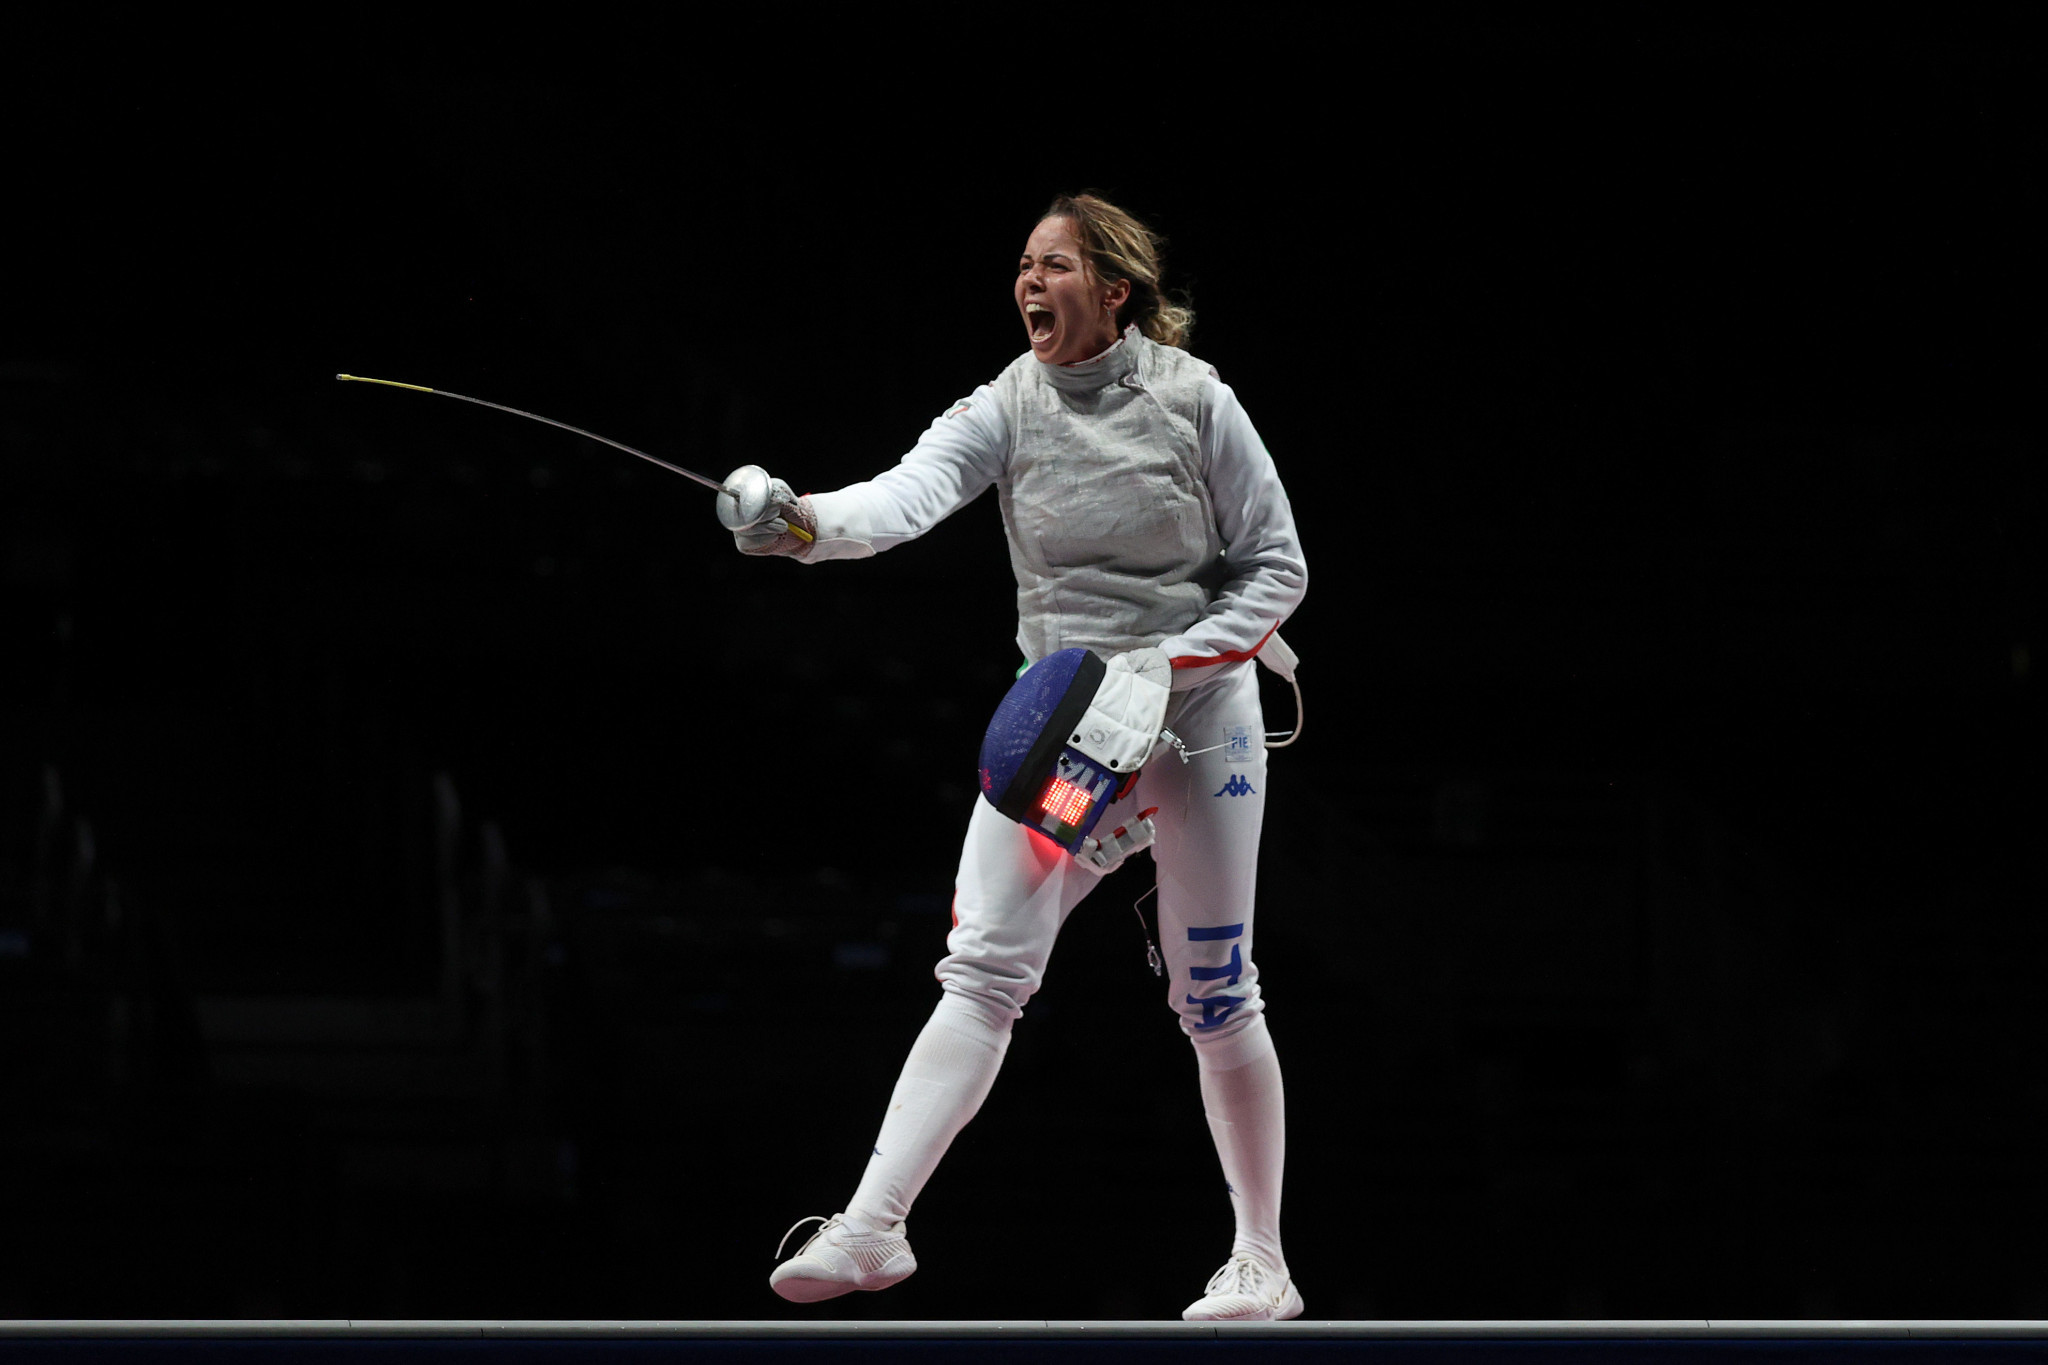 Alice Volpi won women's foil gold in Milan after beating compatriot Arianna Errigo ©Getty Images